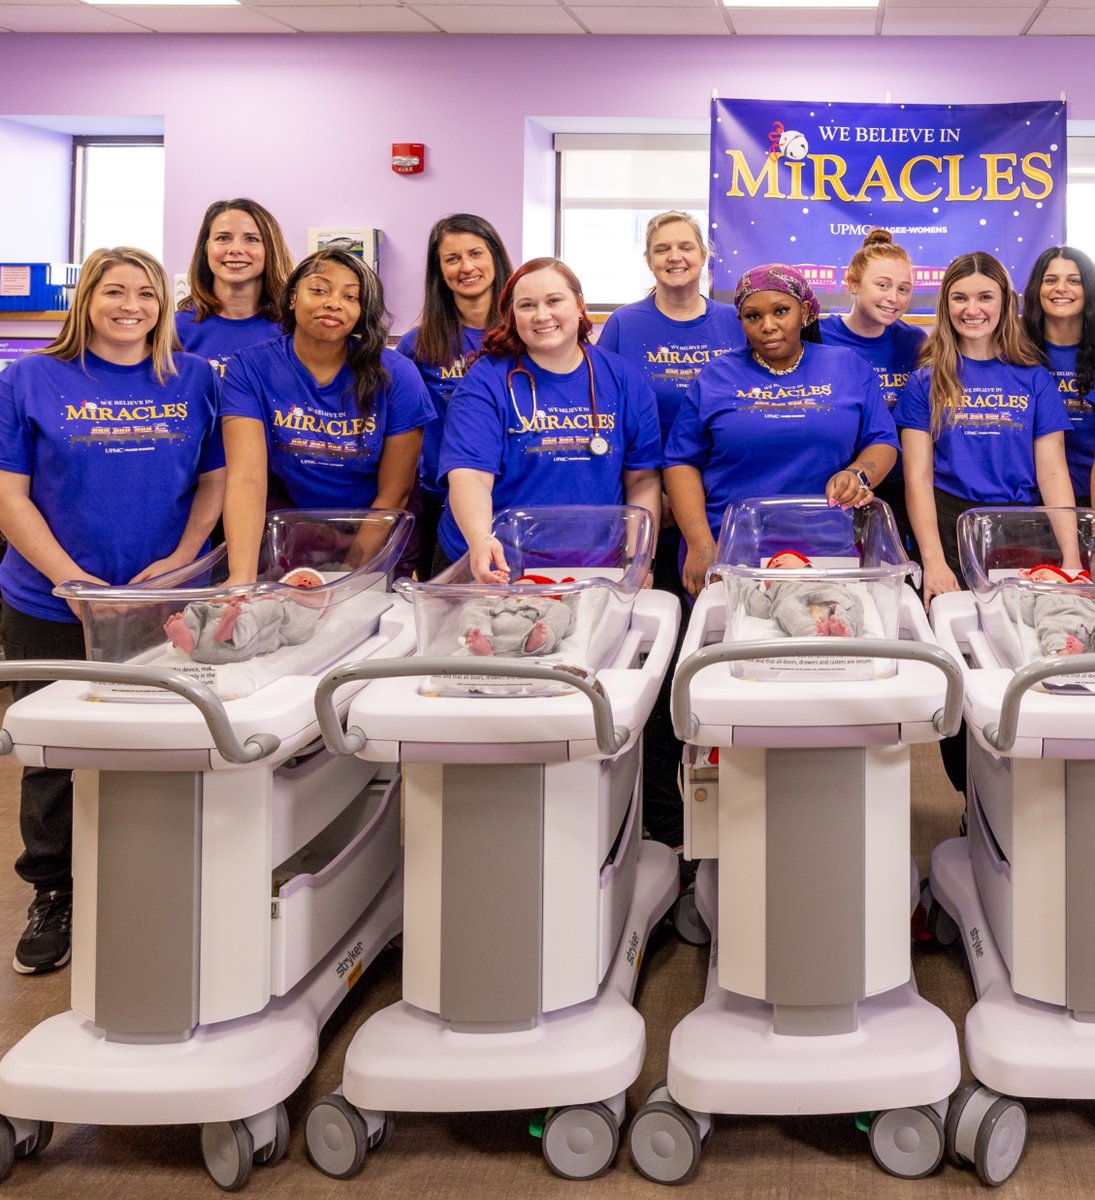 Nurses make a difference in the lives of patients and families every day. This #NationalNursesWeek, honor a nurse with a donation to the Nursing Staff Fund at Magee-Womens, which supports #education for nurses to broaden skills & #clinical knowledge: bit.ly/4b46W7r